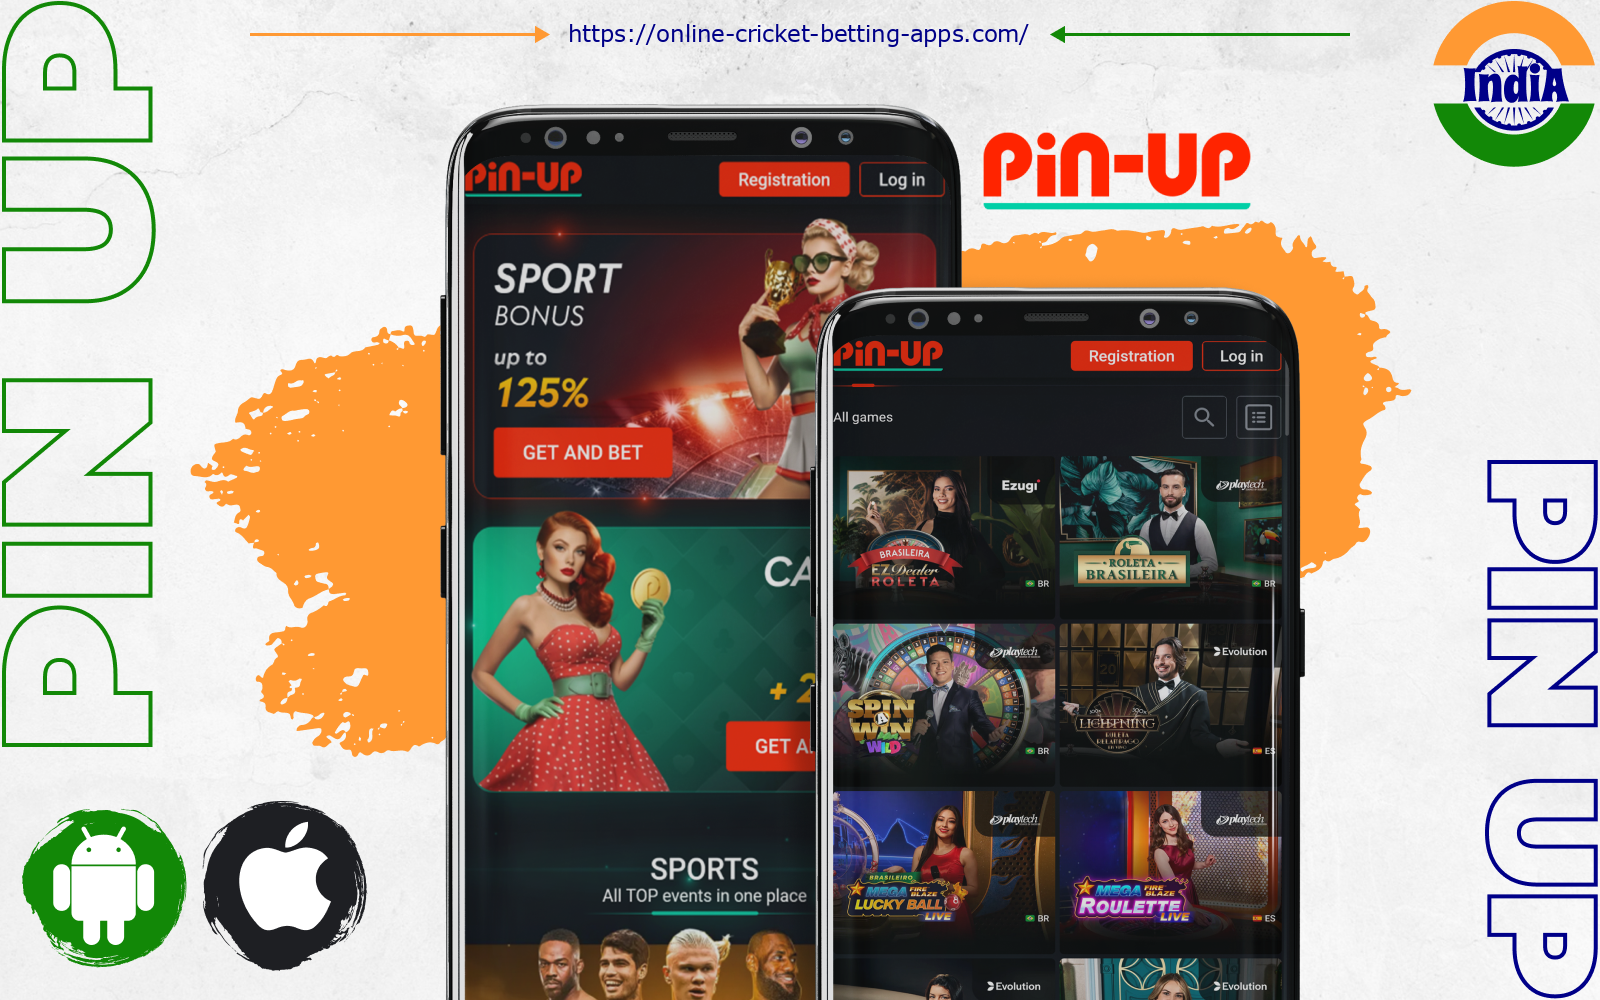 The Pin Up India app for Android and iOS is very user-friendly and is constantly being updated with new features